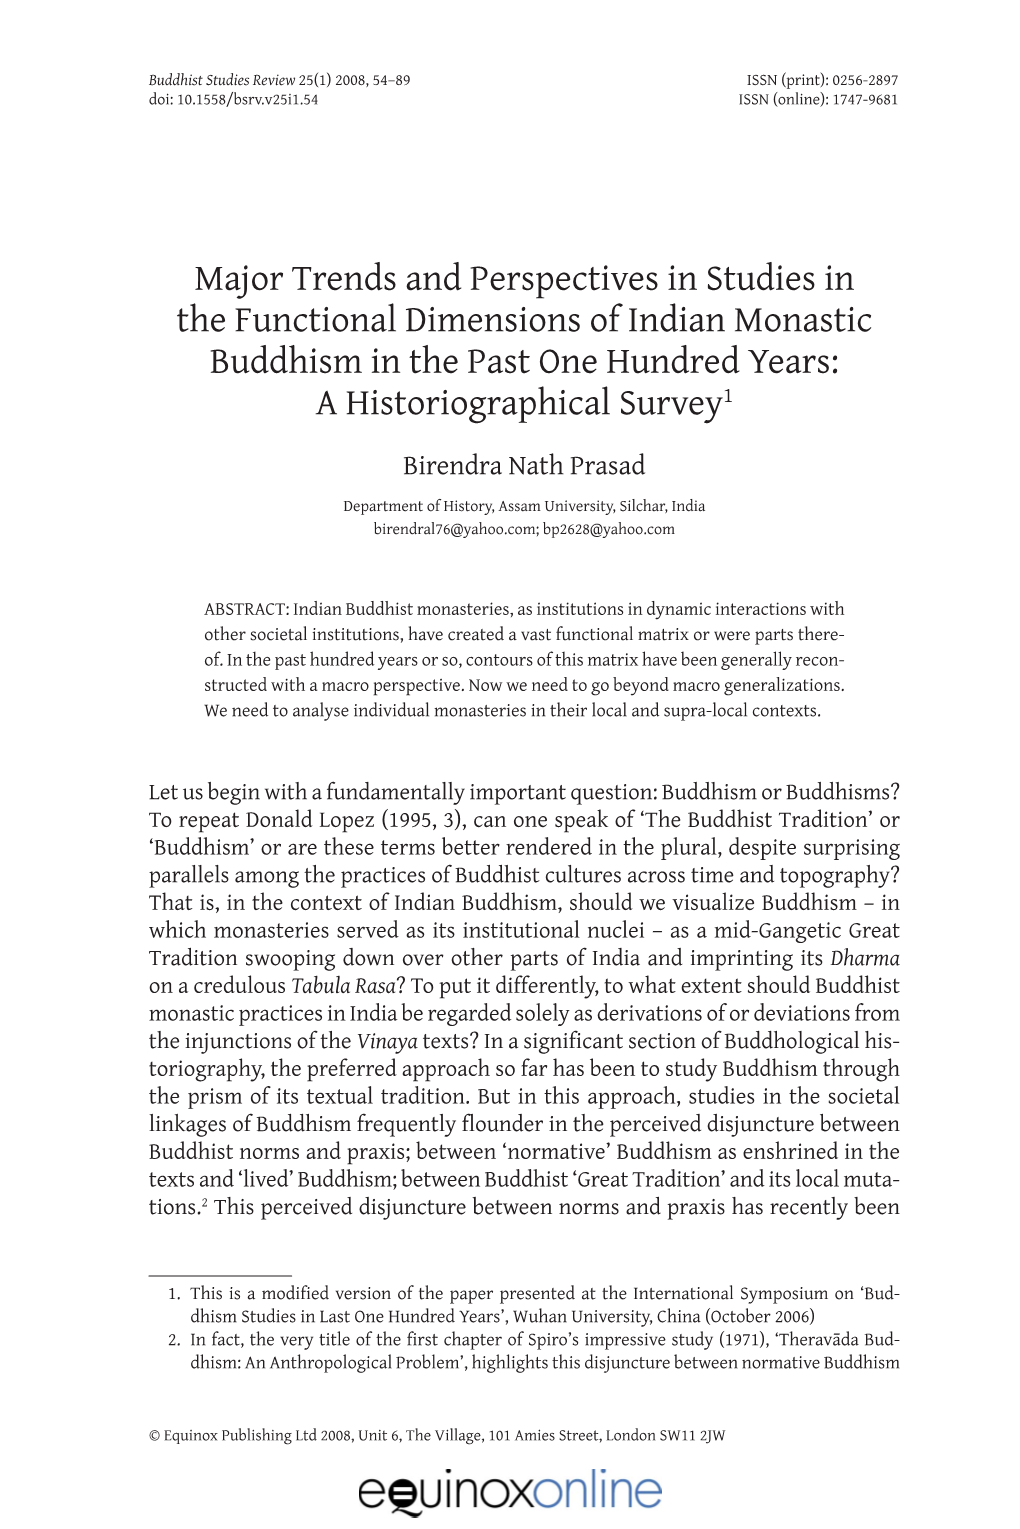 Major Trends and Perspectives in Studies in the Functional Dimensions of Indian Monastic ­Buddhism in the Past One Hundred Years: a Historiographical Survey